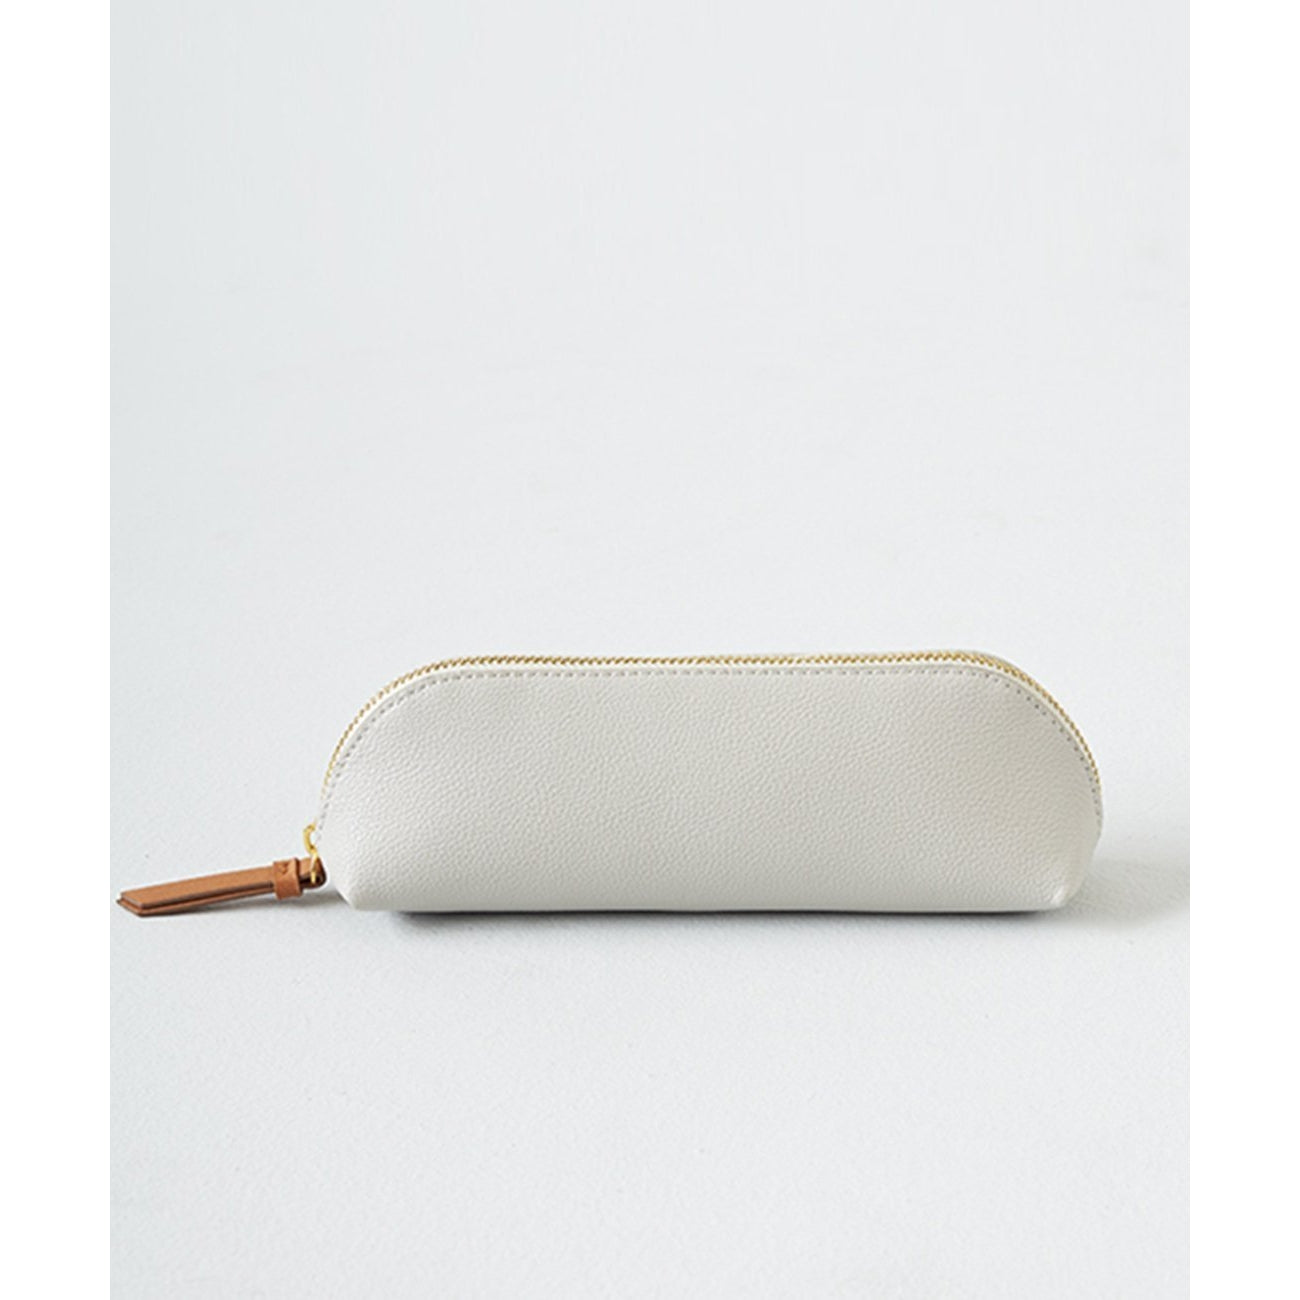 Vessel Vegan Leather Cosmetic and Pencil Case - Grey and Blush